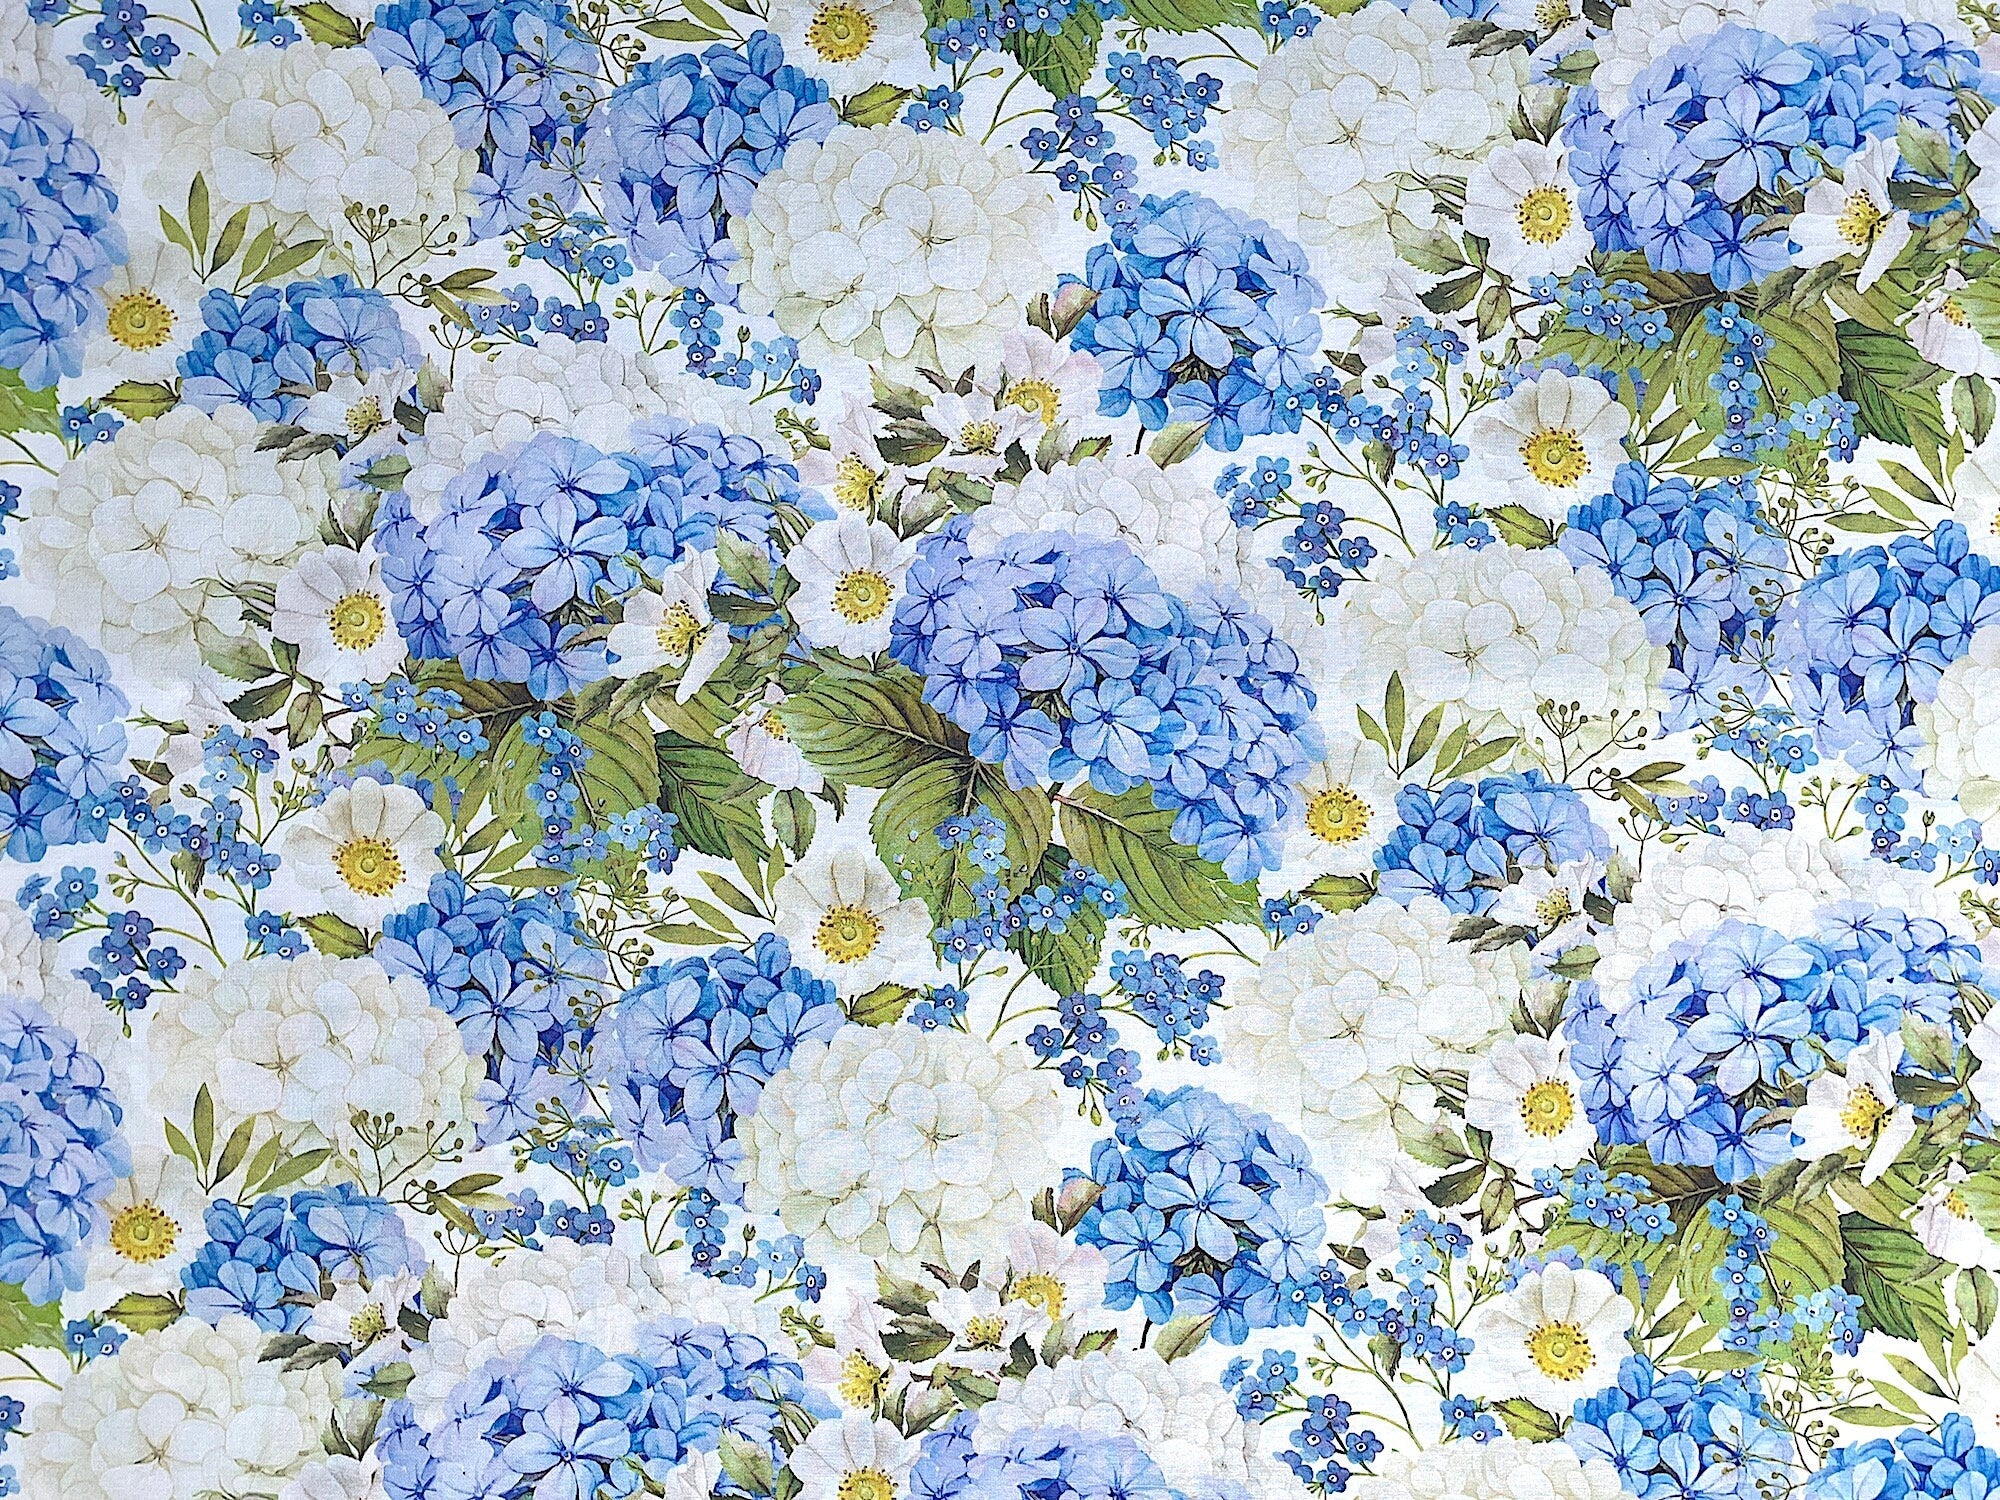 Cotton fabric covered with white and blue packed hibiscus.